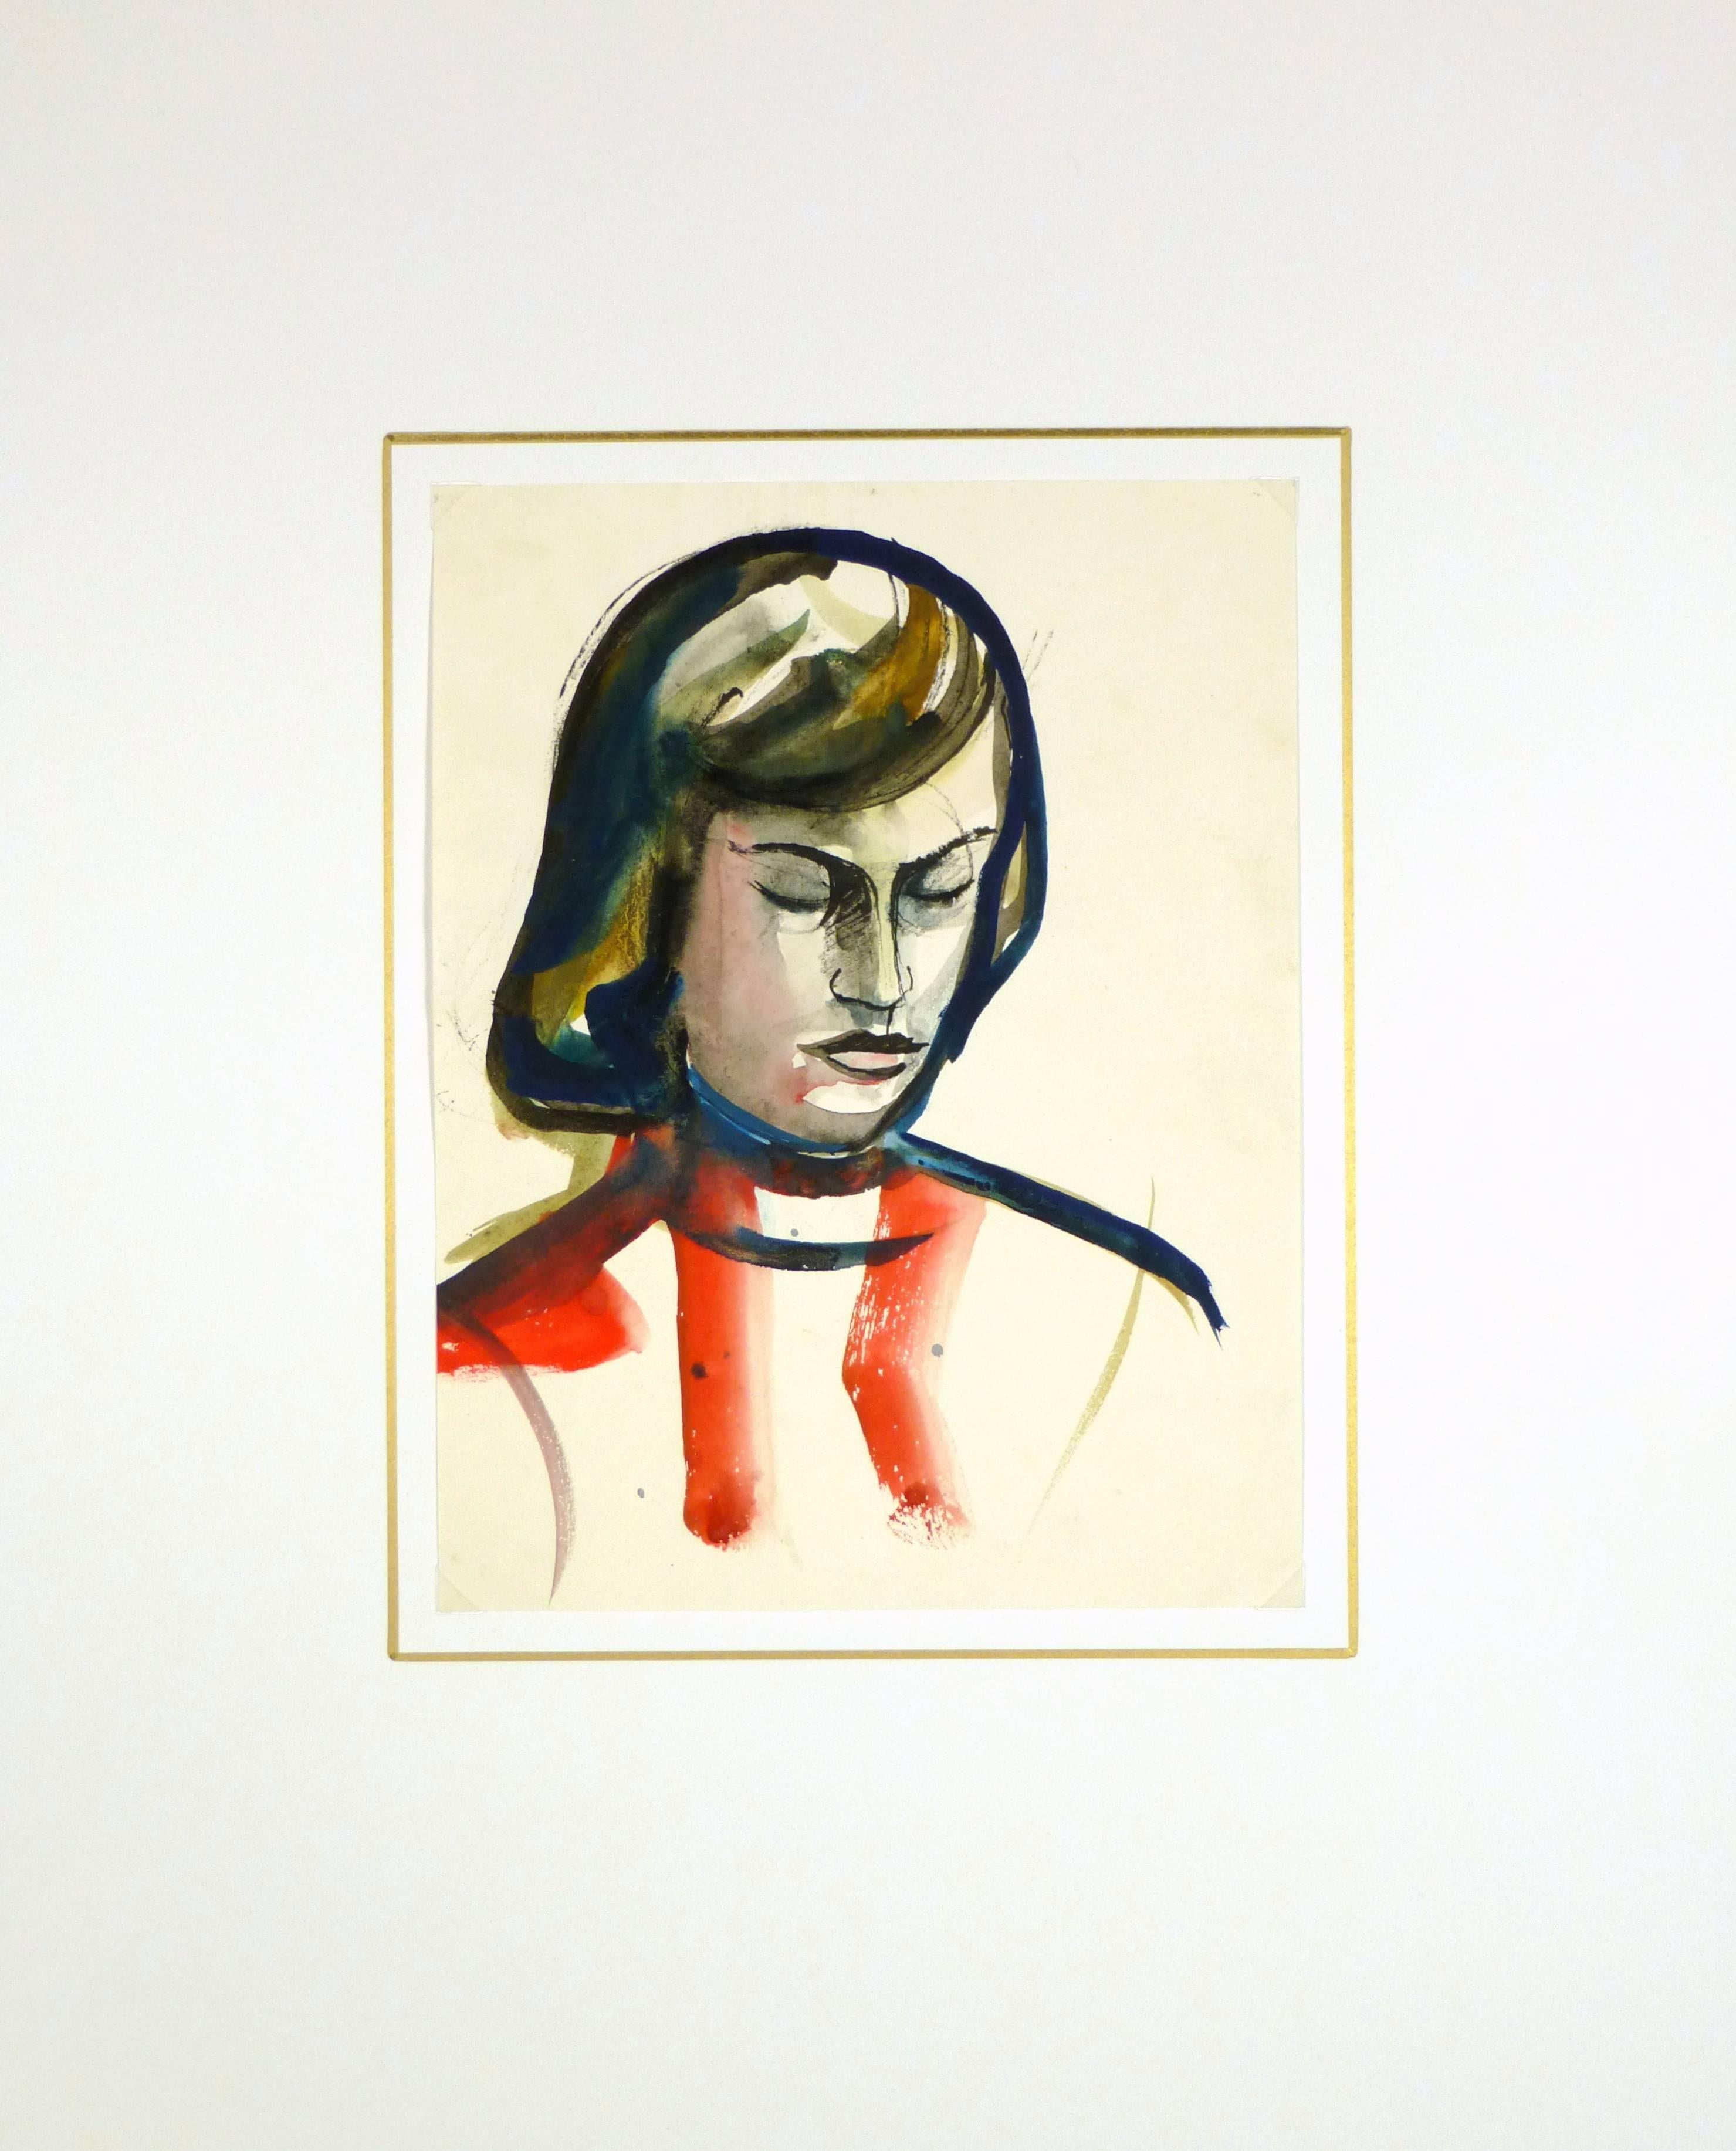 Stunning portrait of French lady in gouache on paper, circa 1950.

Original artwork on paper displayed on a white mat with a gold border. Archival plastic sleeve and Certificate of Authenticity included. Artwork, 7.75